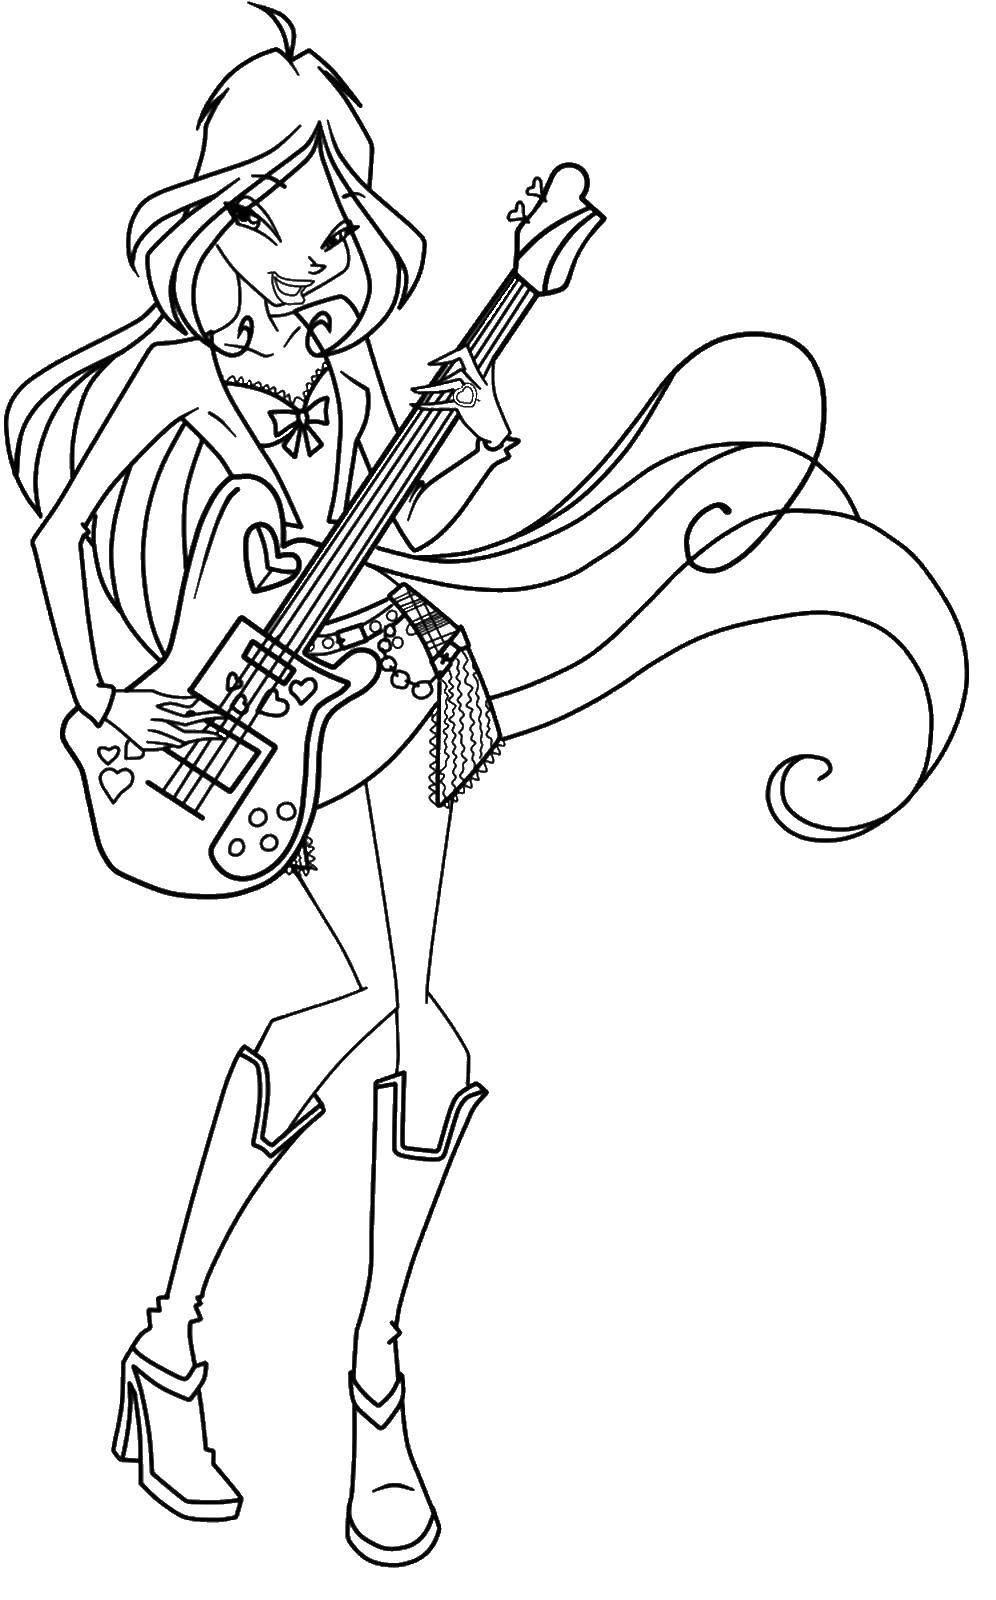 Coloring Flora with guitar. Category Winx. Tags:  flora, guitar.